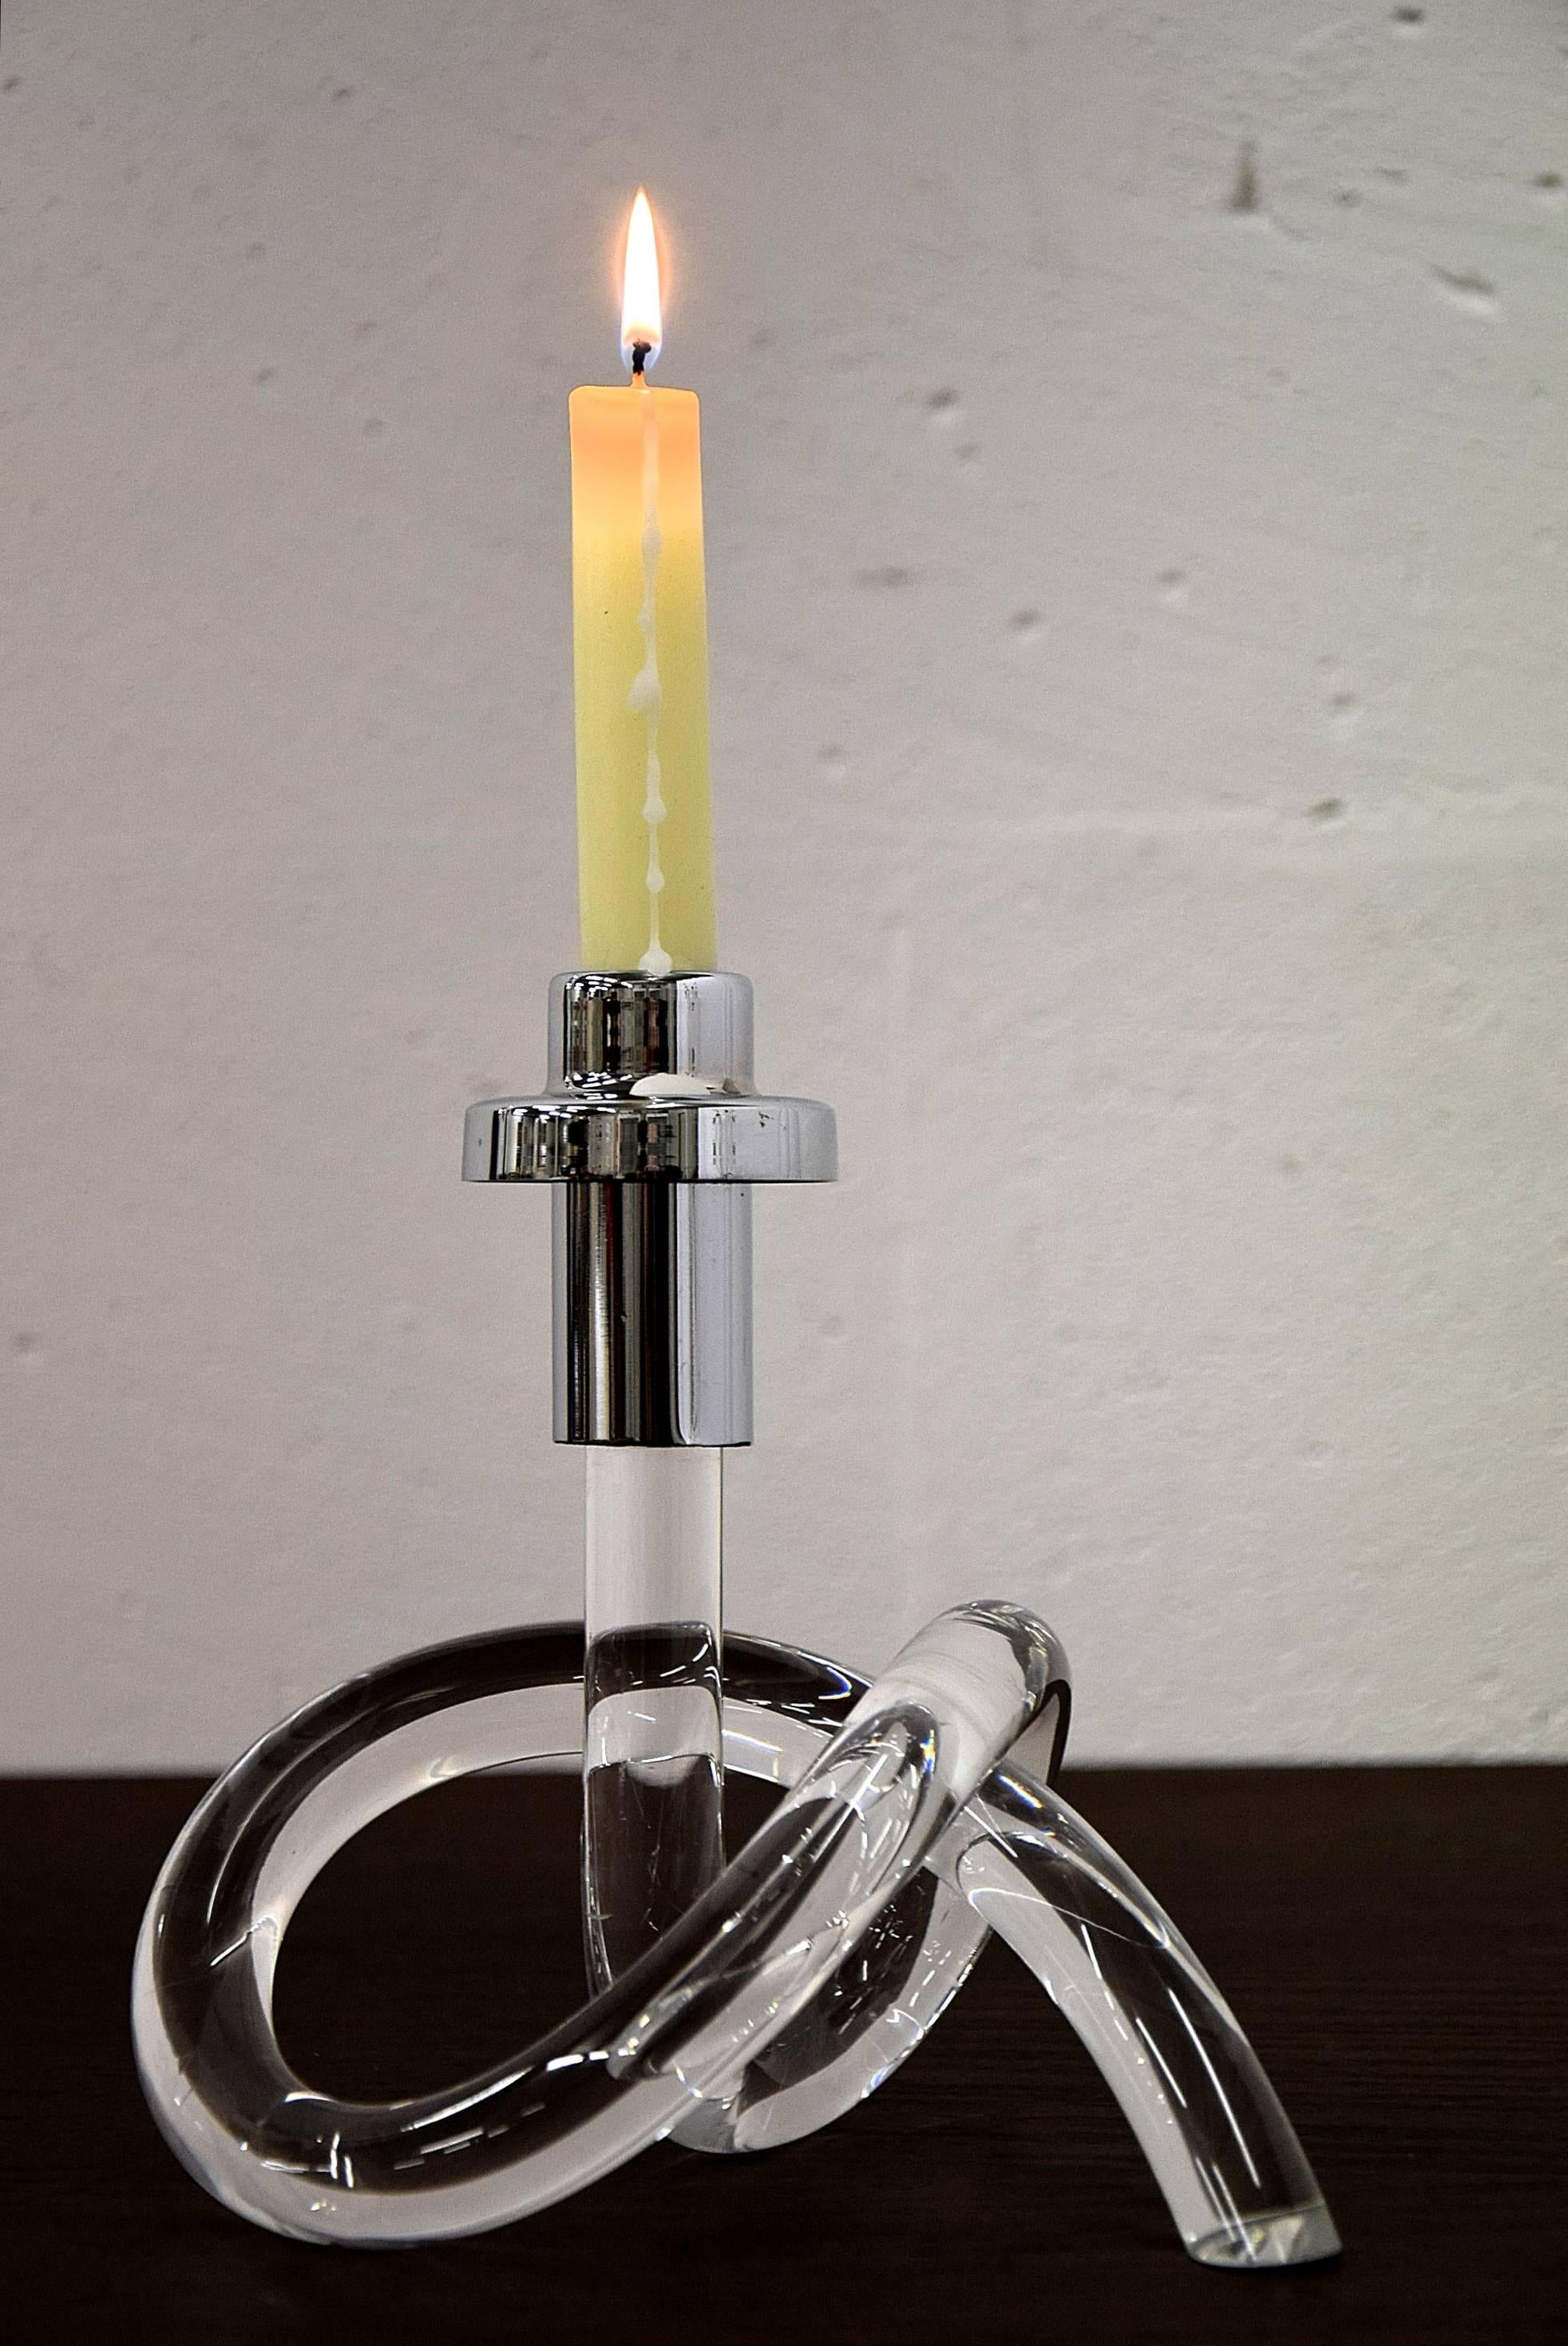 Chrome and Lucite Mid-Century candleholder by Dorothy Thorpe.

This elegant piece was created by Dorothy Thorpe in the early 1950s.

Measurements: D 21 x W 16 x H 20 cm.

Born in Salt Lake City in 1901, Dorothy Thorpe was a Mid-Century